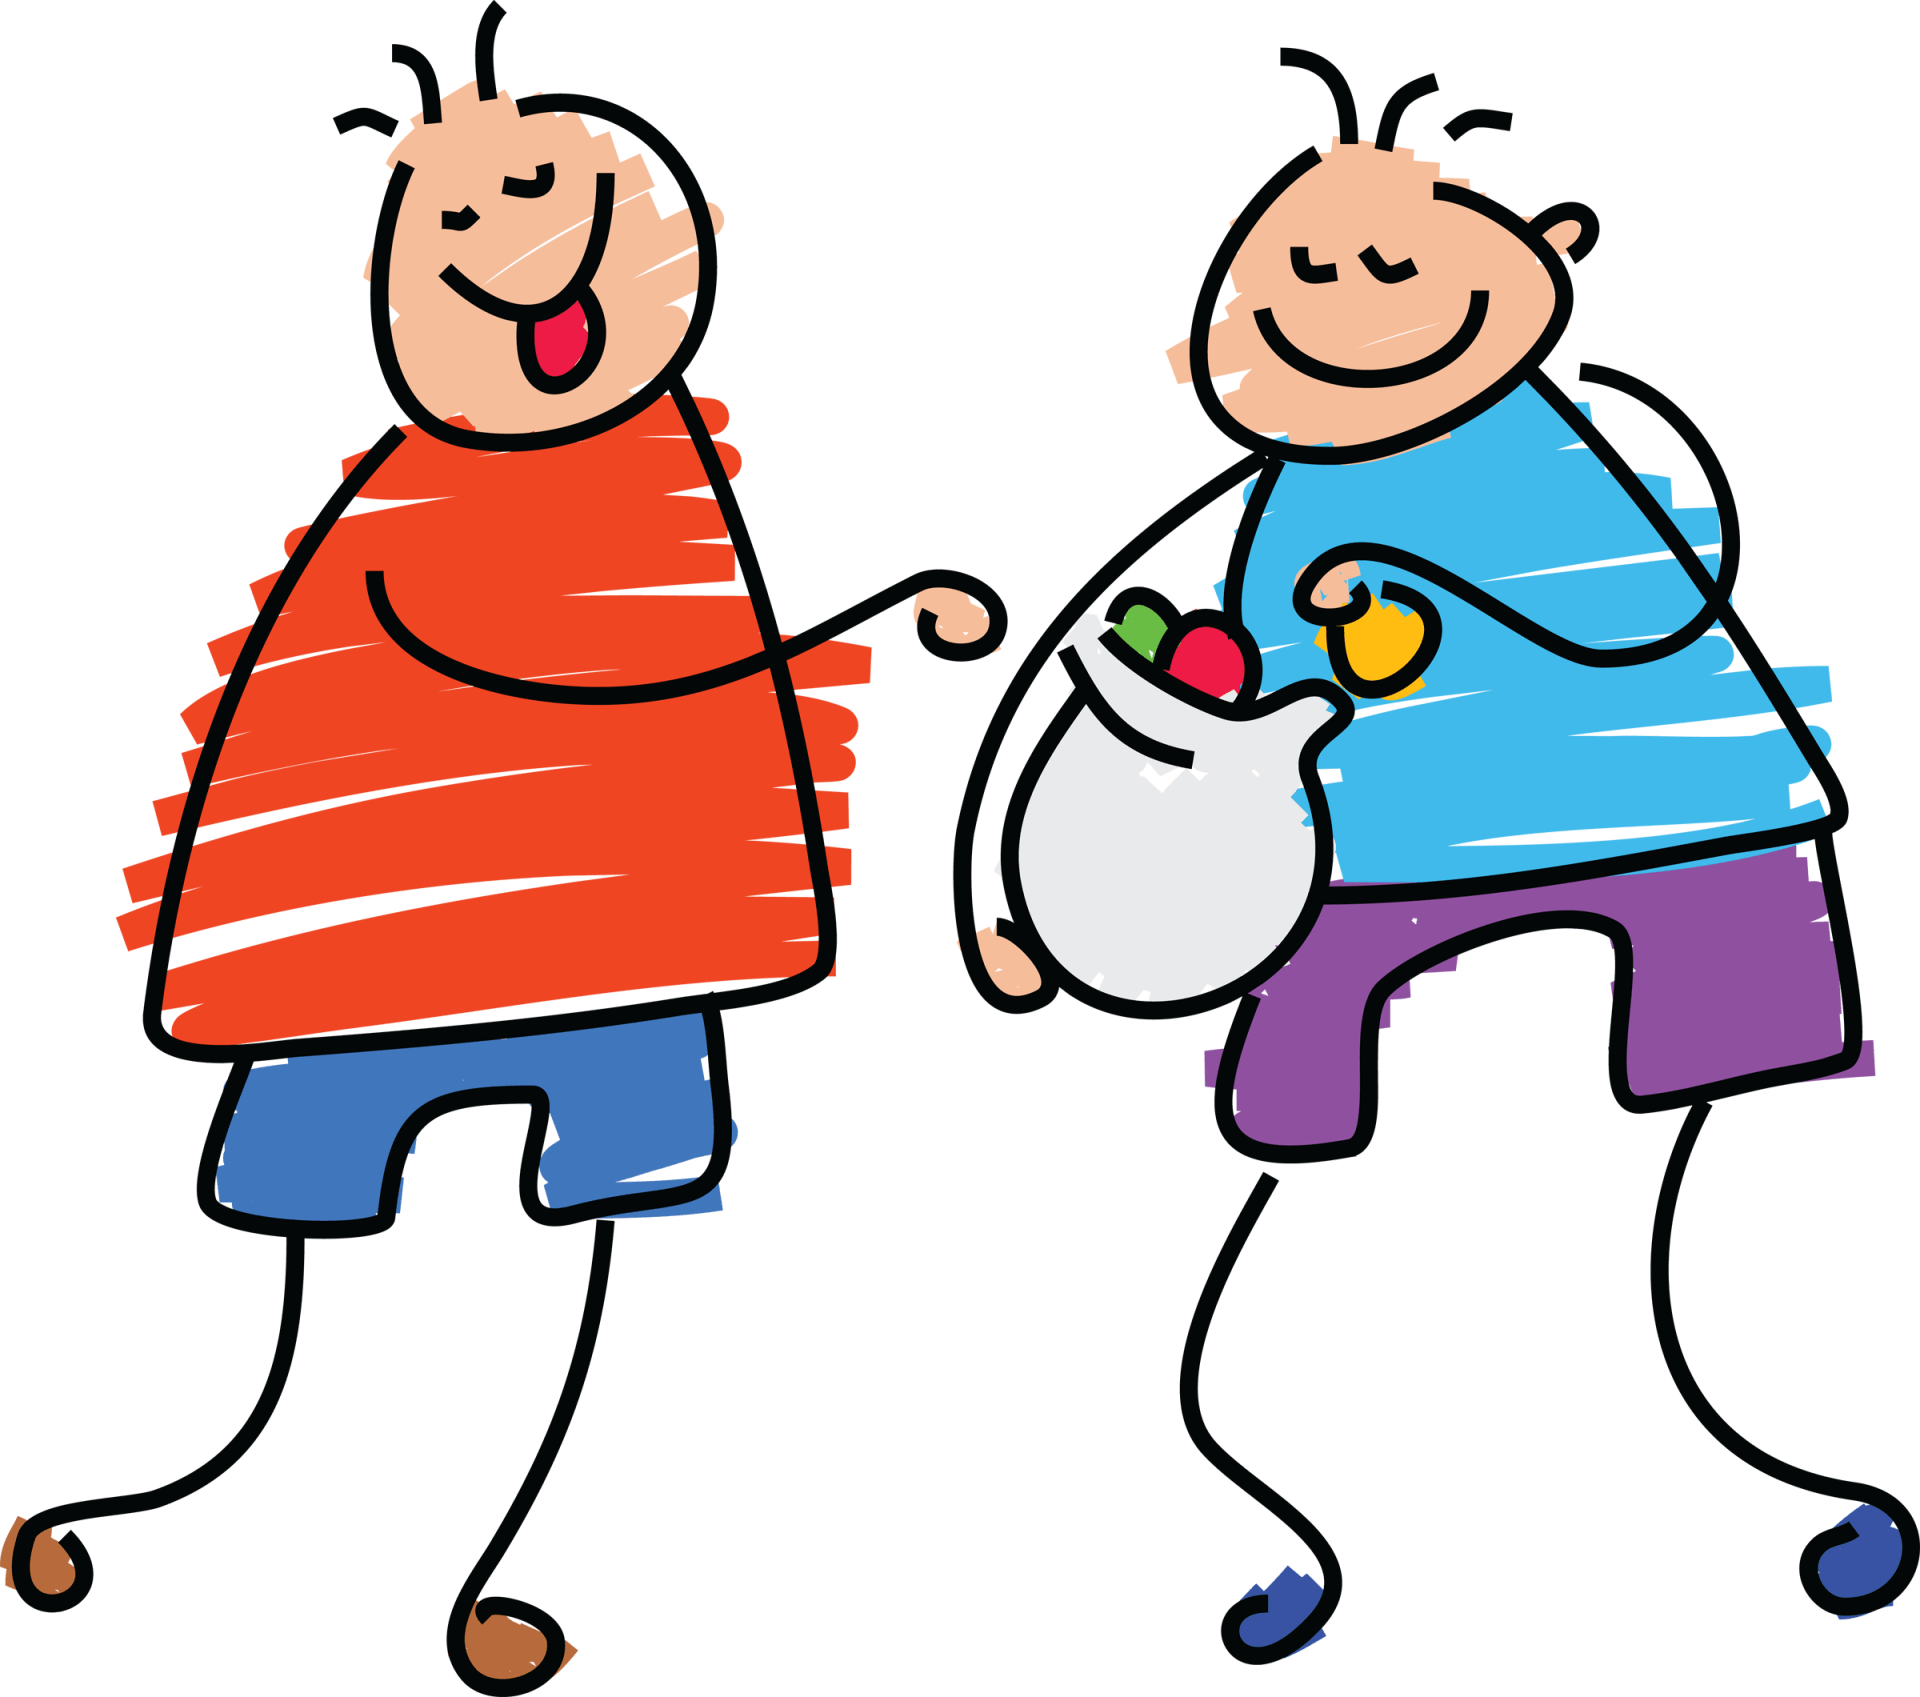 Cartoon line drawing of two children sharing a bag of sweets.